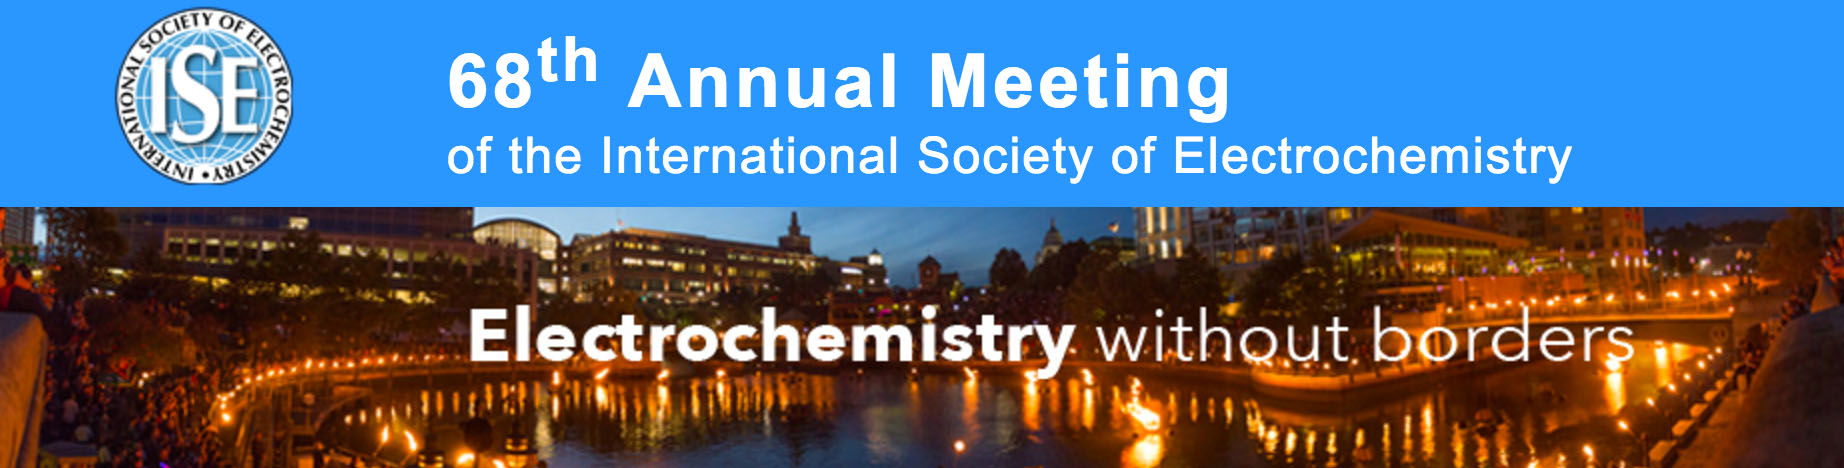 68th Annual Meeting ISE, International Society of Electrochemistry